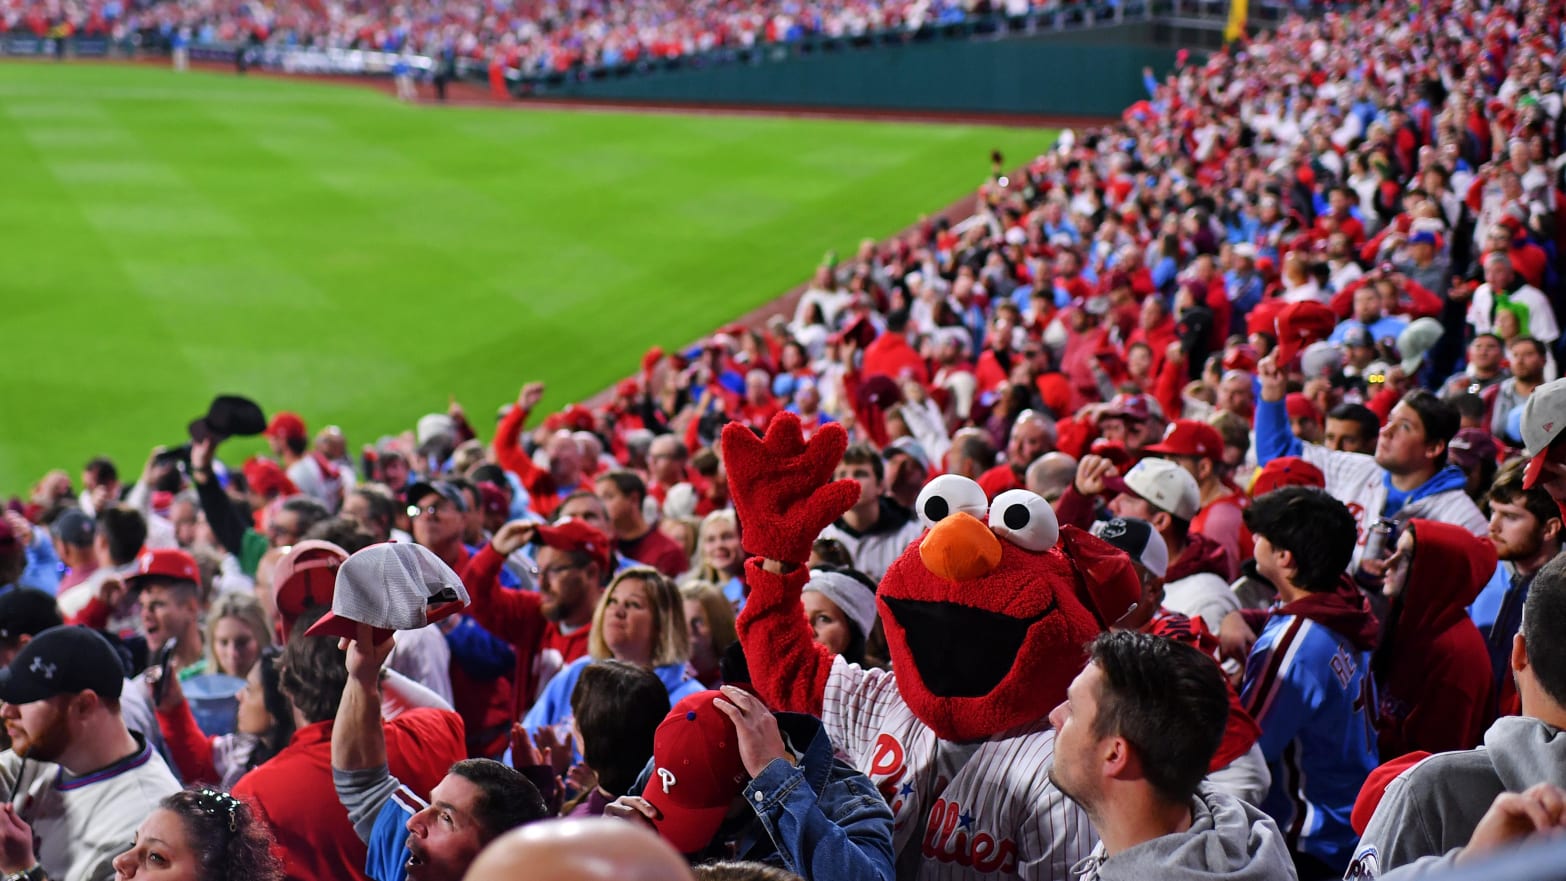 Phillies fans pack into the stands for a playoff baseball game.